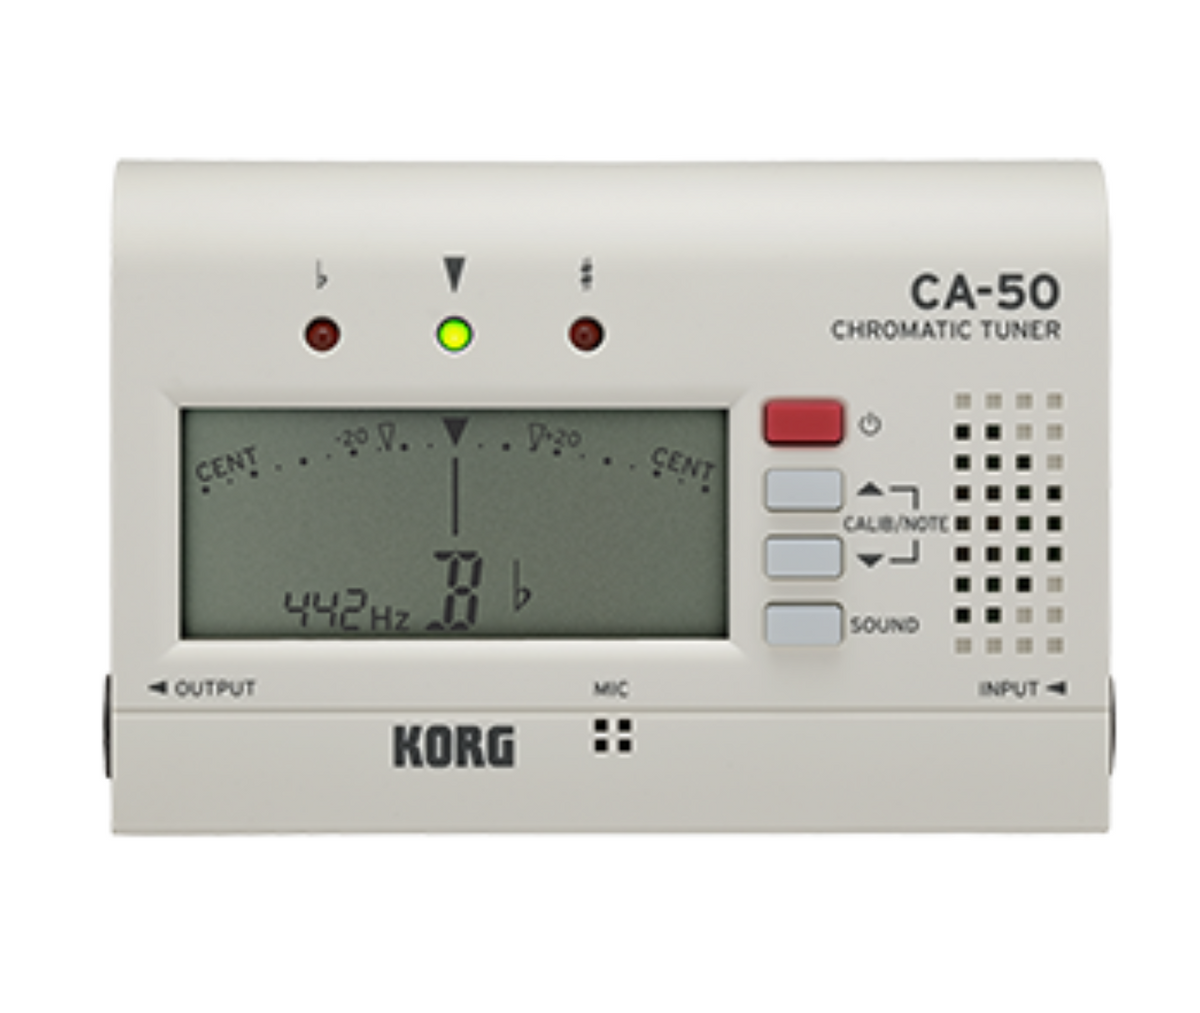 KORG CA-50 Chromatic Best Guitar Tuner High-precision Tuning Functionality in Slim and Compact Design for Orchestral Instruments